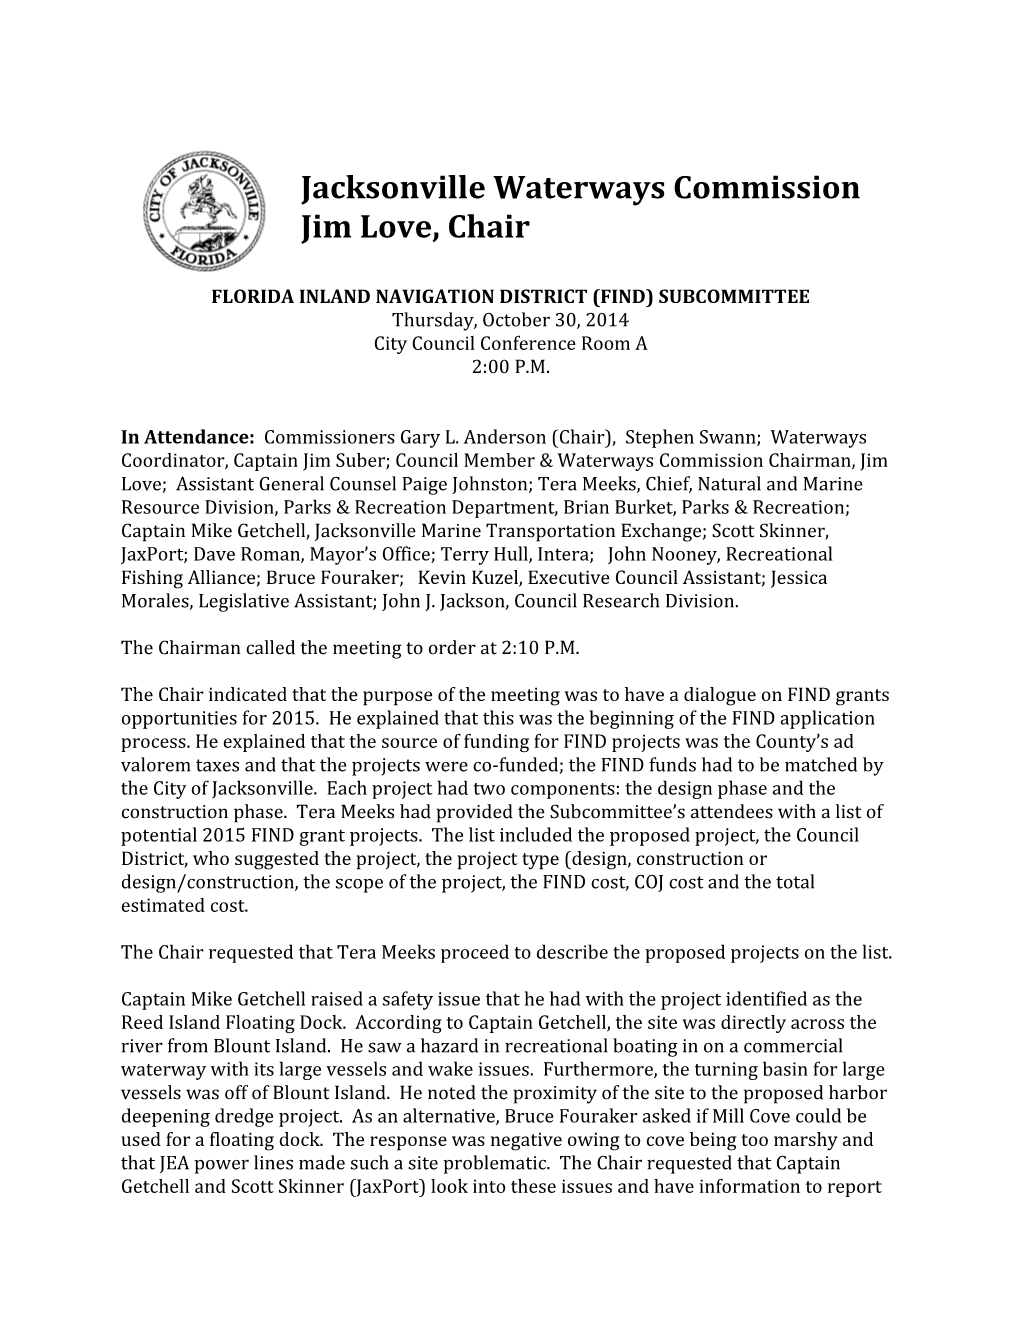 Florida Inland Navigation District (Find) Subcommittee